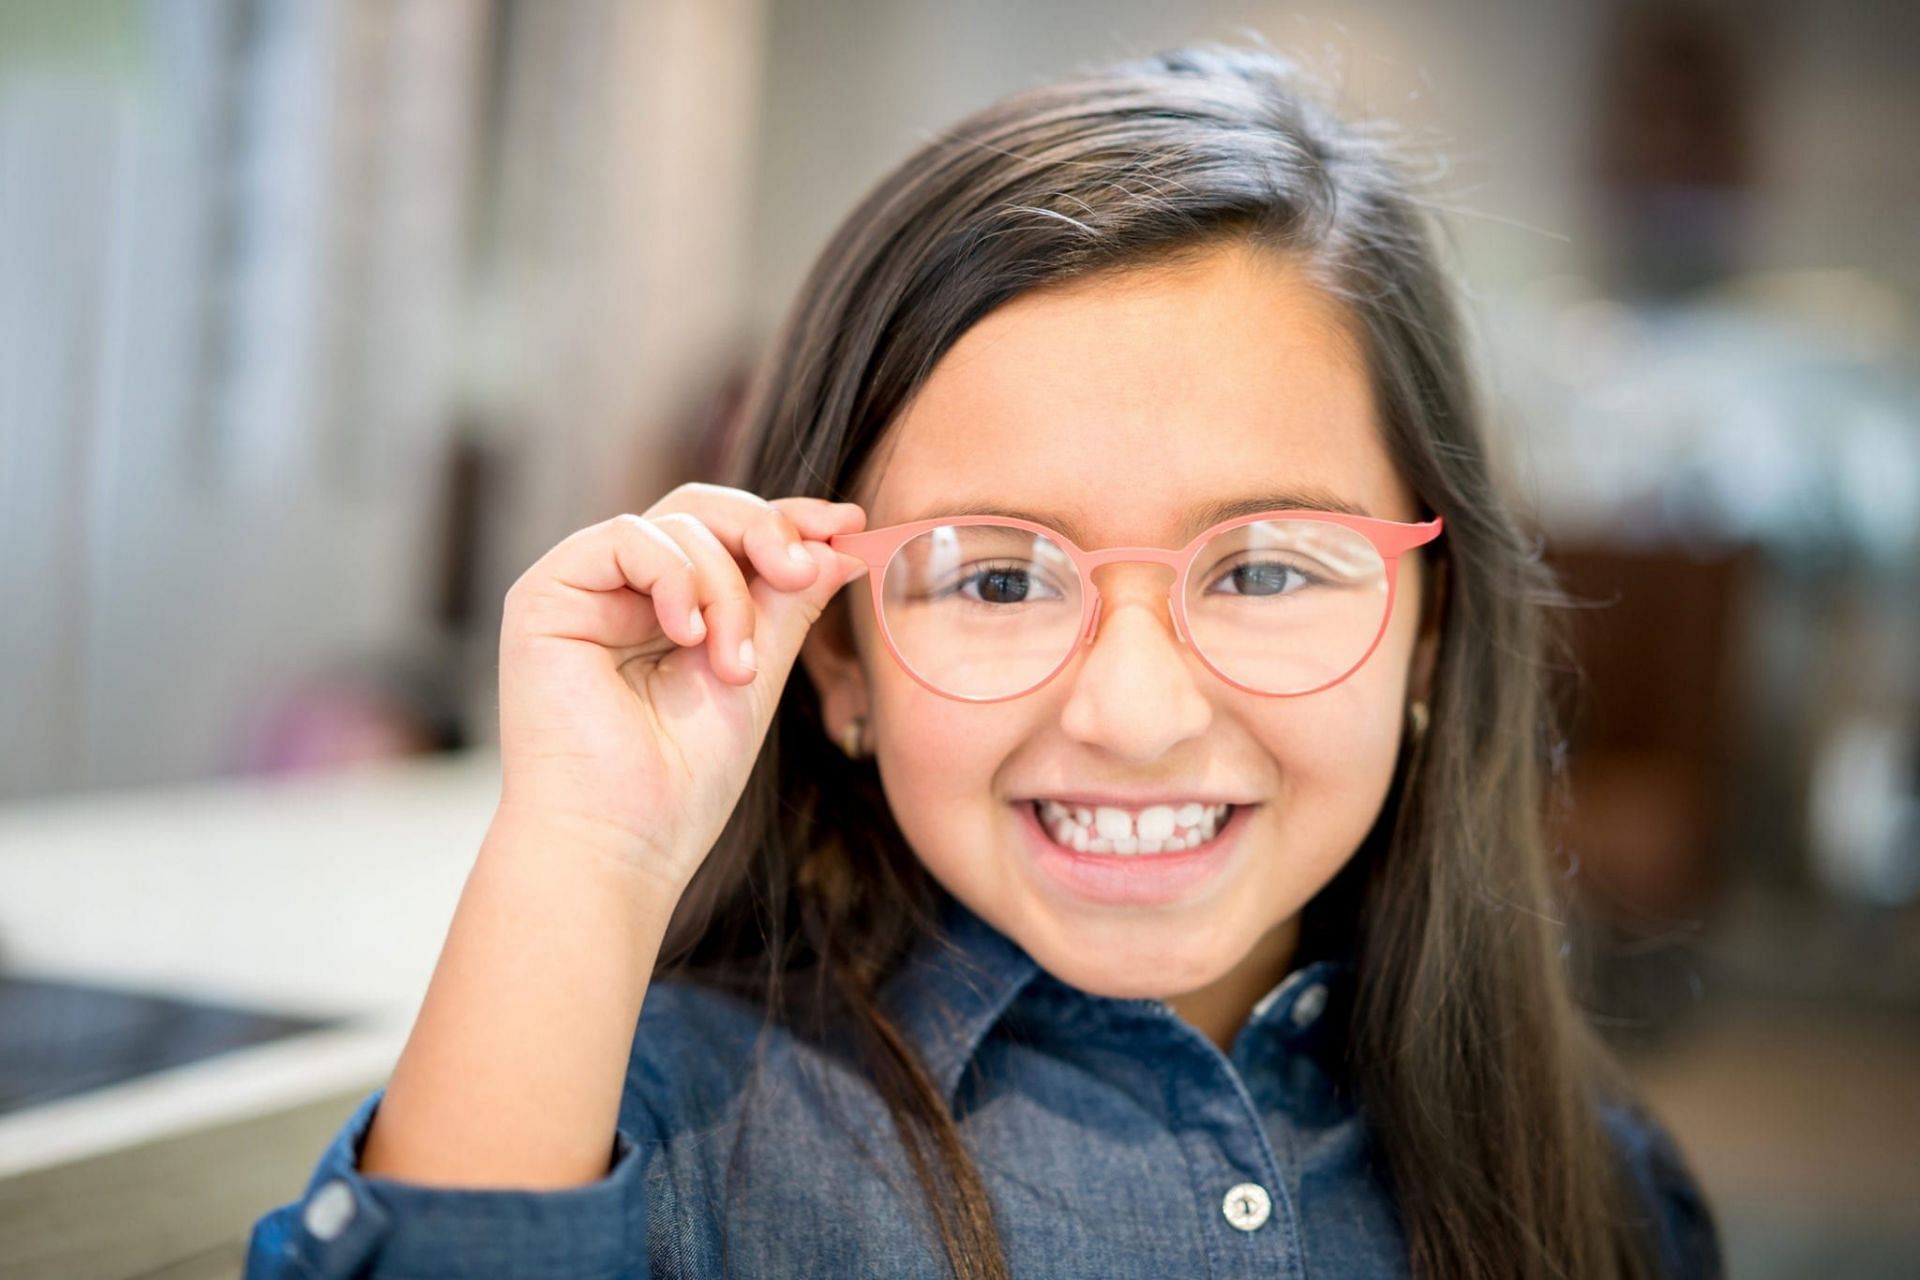 Protective measures for children&#039;s eye health (Image via Maine Optometry)